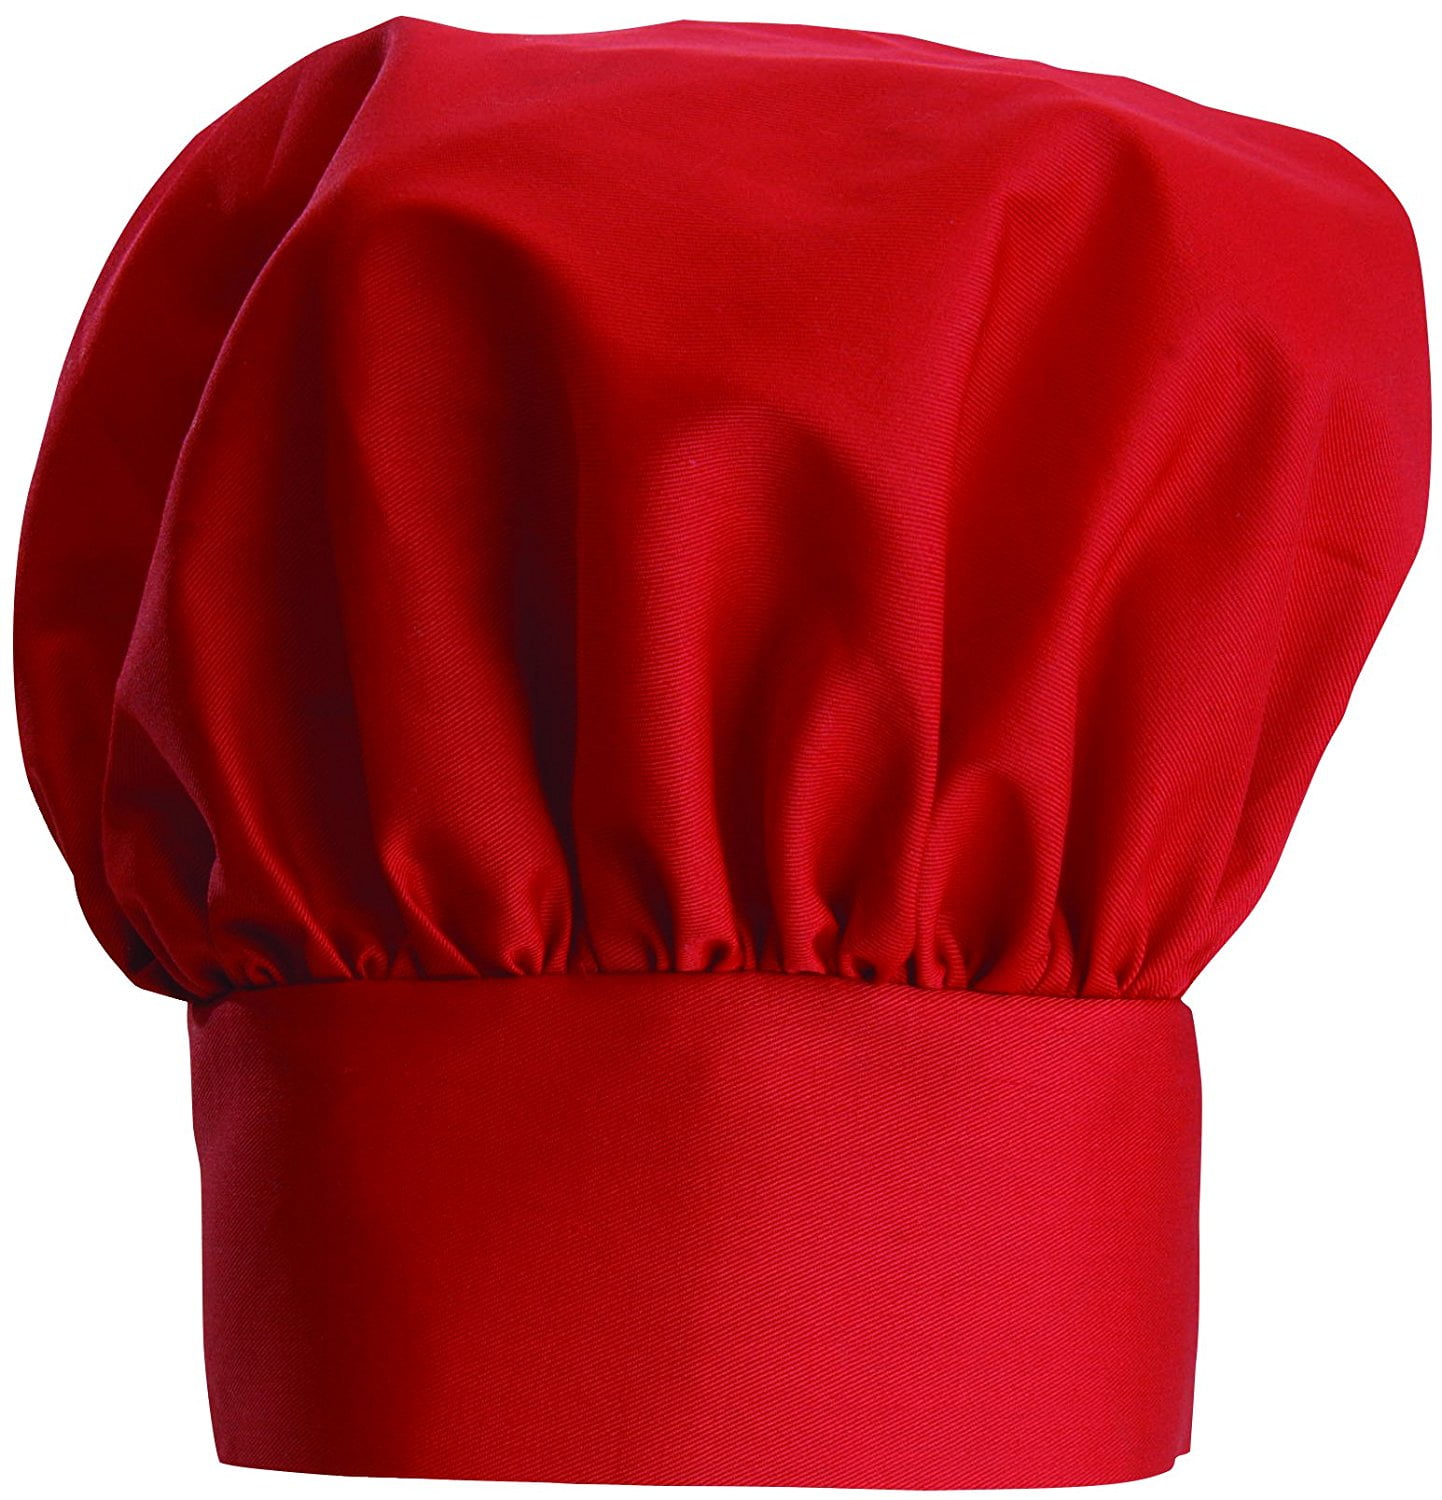 USA SELLER  CLOTH CHEF HAT BLACK ONE SIZE FITS ALL  ADJUSTABLE VELCRO® CLOSURE 